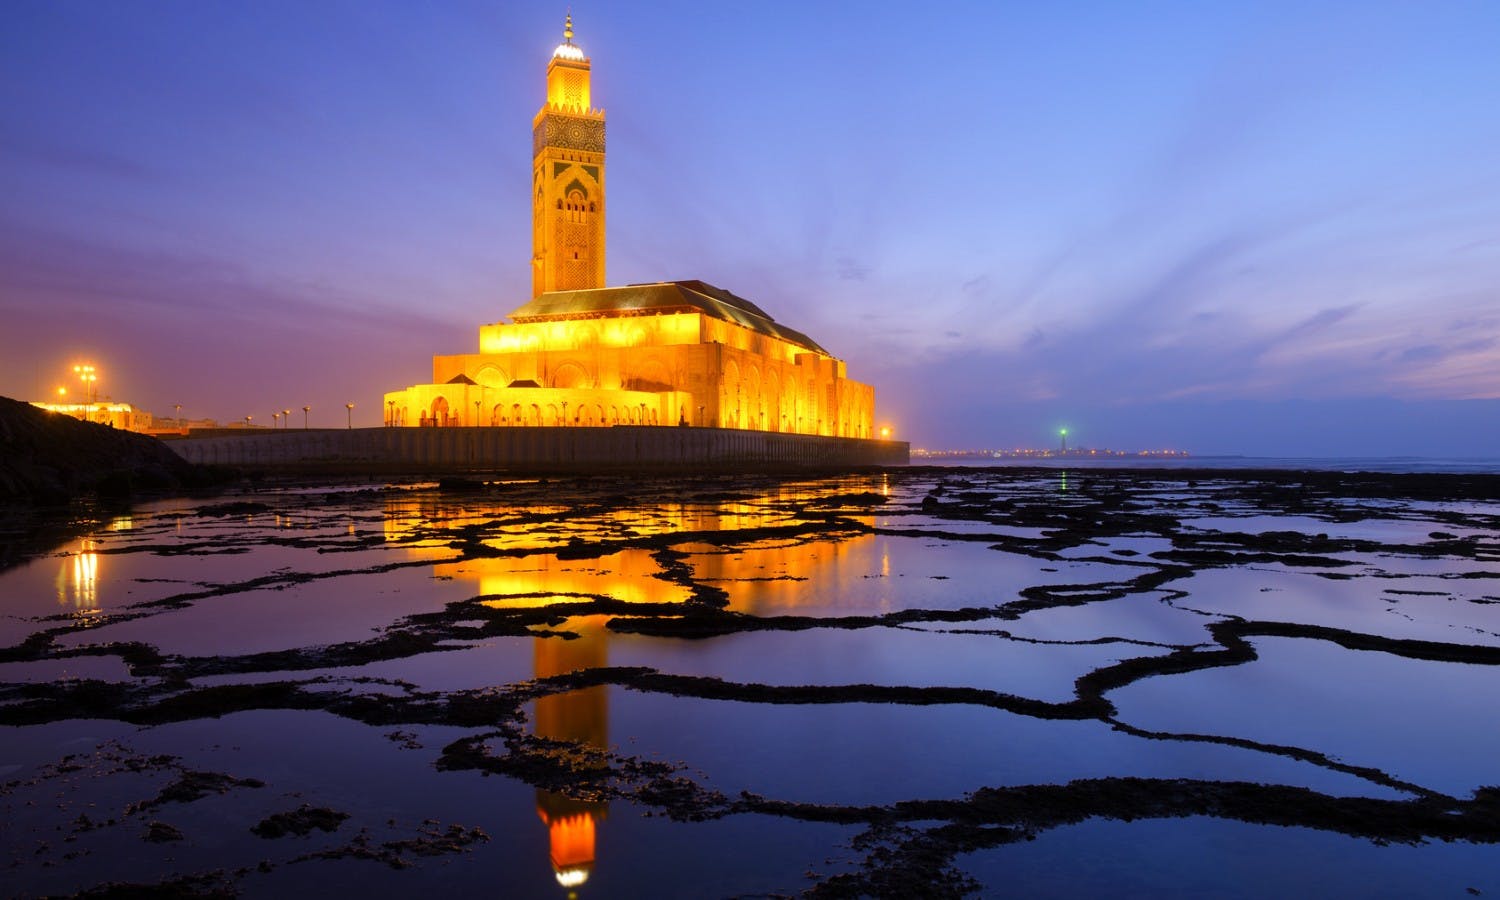 Hassan II Mosque during the sunset in Casablanca, Morocco.jpg